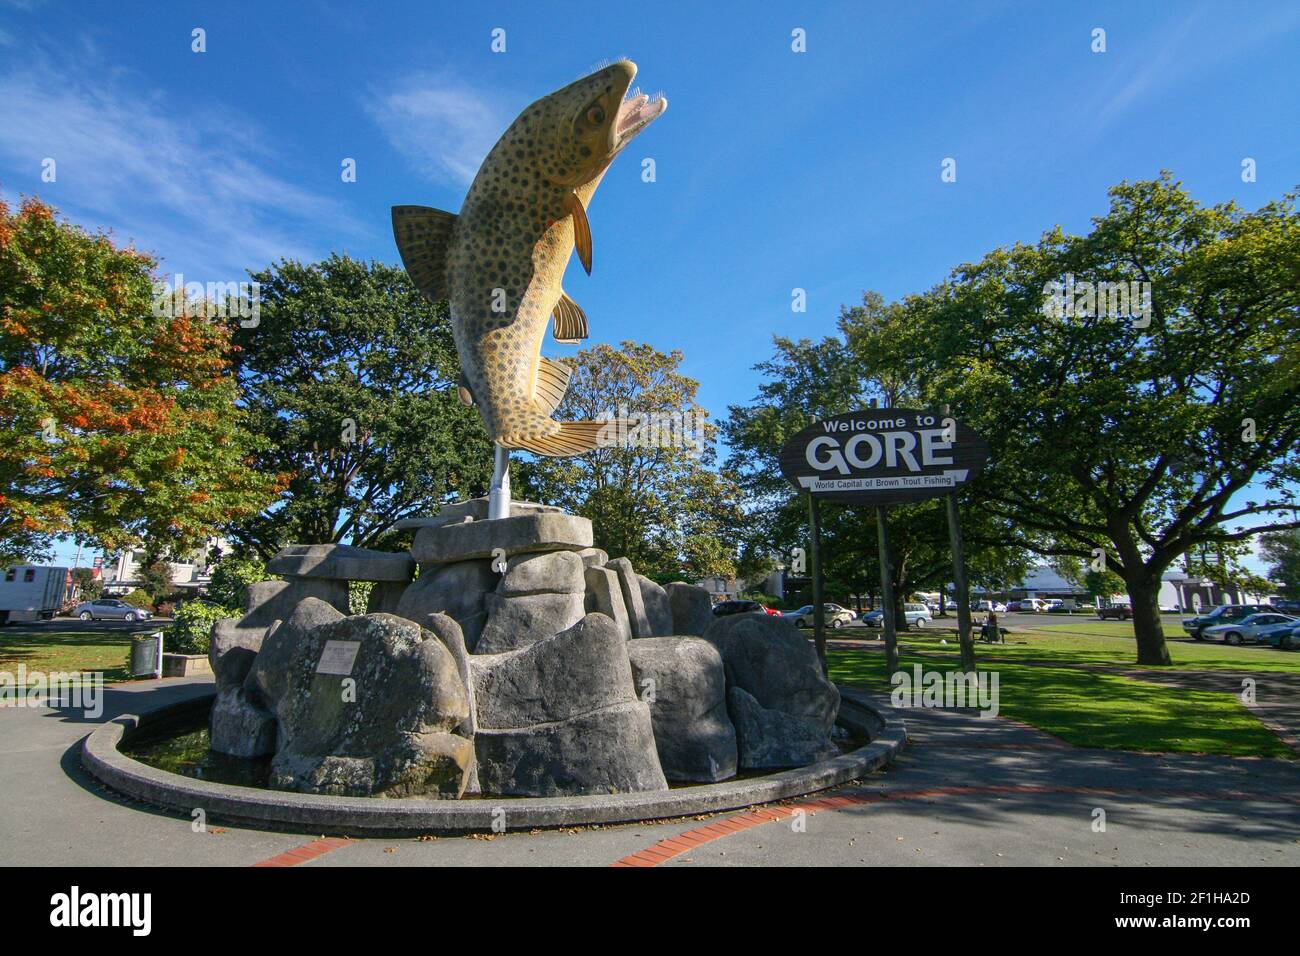 Brown trout statue in Gore, Southland, New Zealand. World Capital of Brown Trout Fishing. Stock Photo